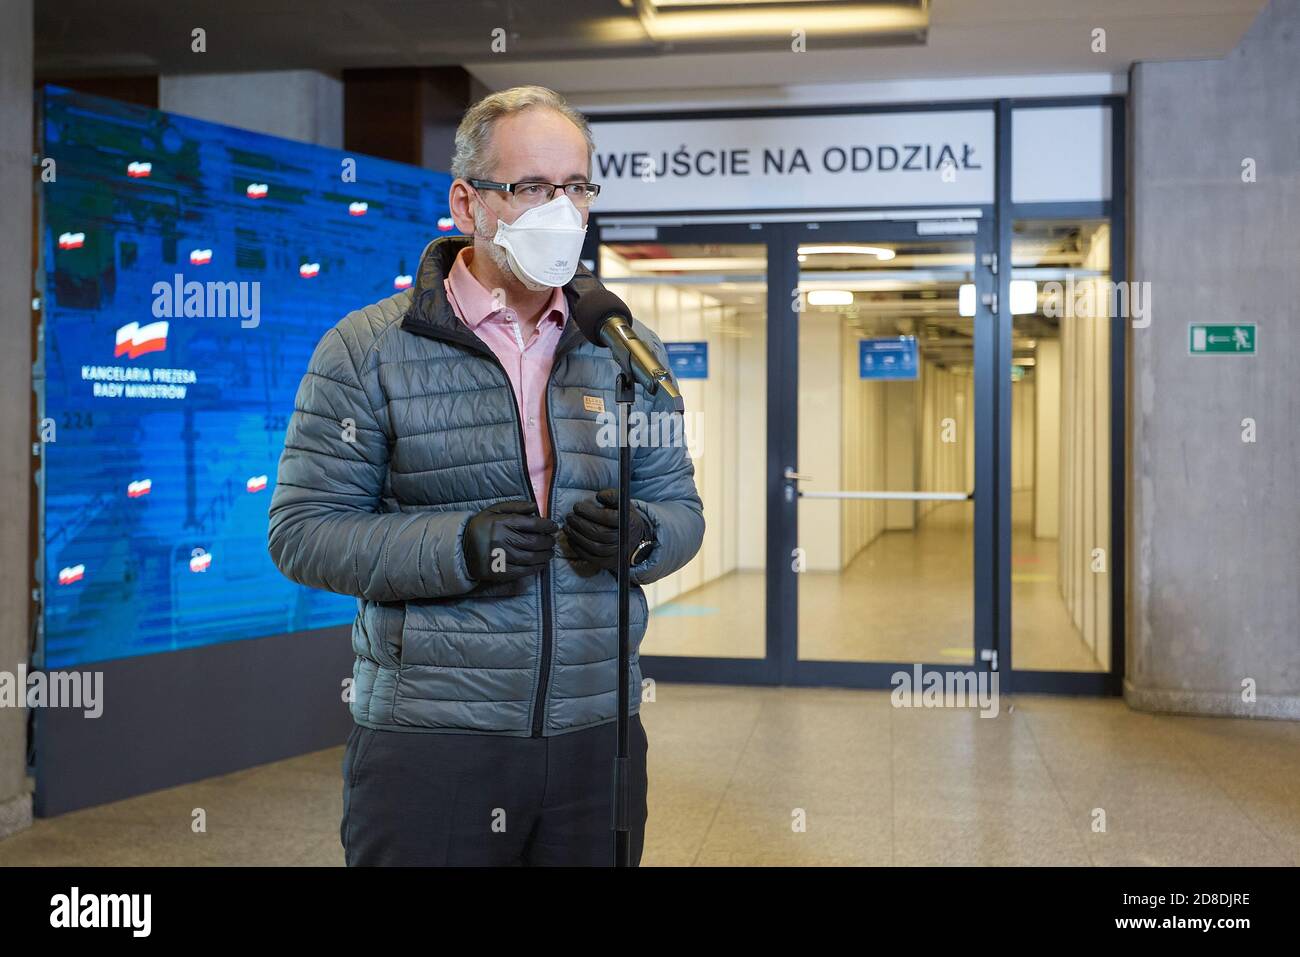 Warsaw, Mazovian, Poland. 29th Oct, 2020. Conference Of The Prime Minister And The Minister Of Health At The National Stadium In Warsaw.in the picture: ADAM NIEDZIELSKI Credit: Hubert Mathis/ZUMA Wire/Alamy Live News Stock Photo